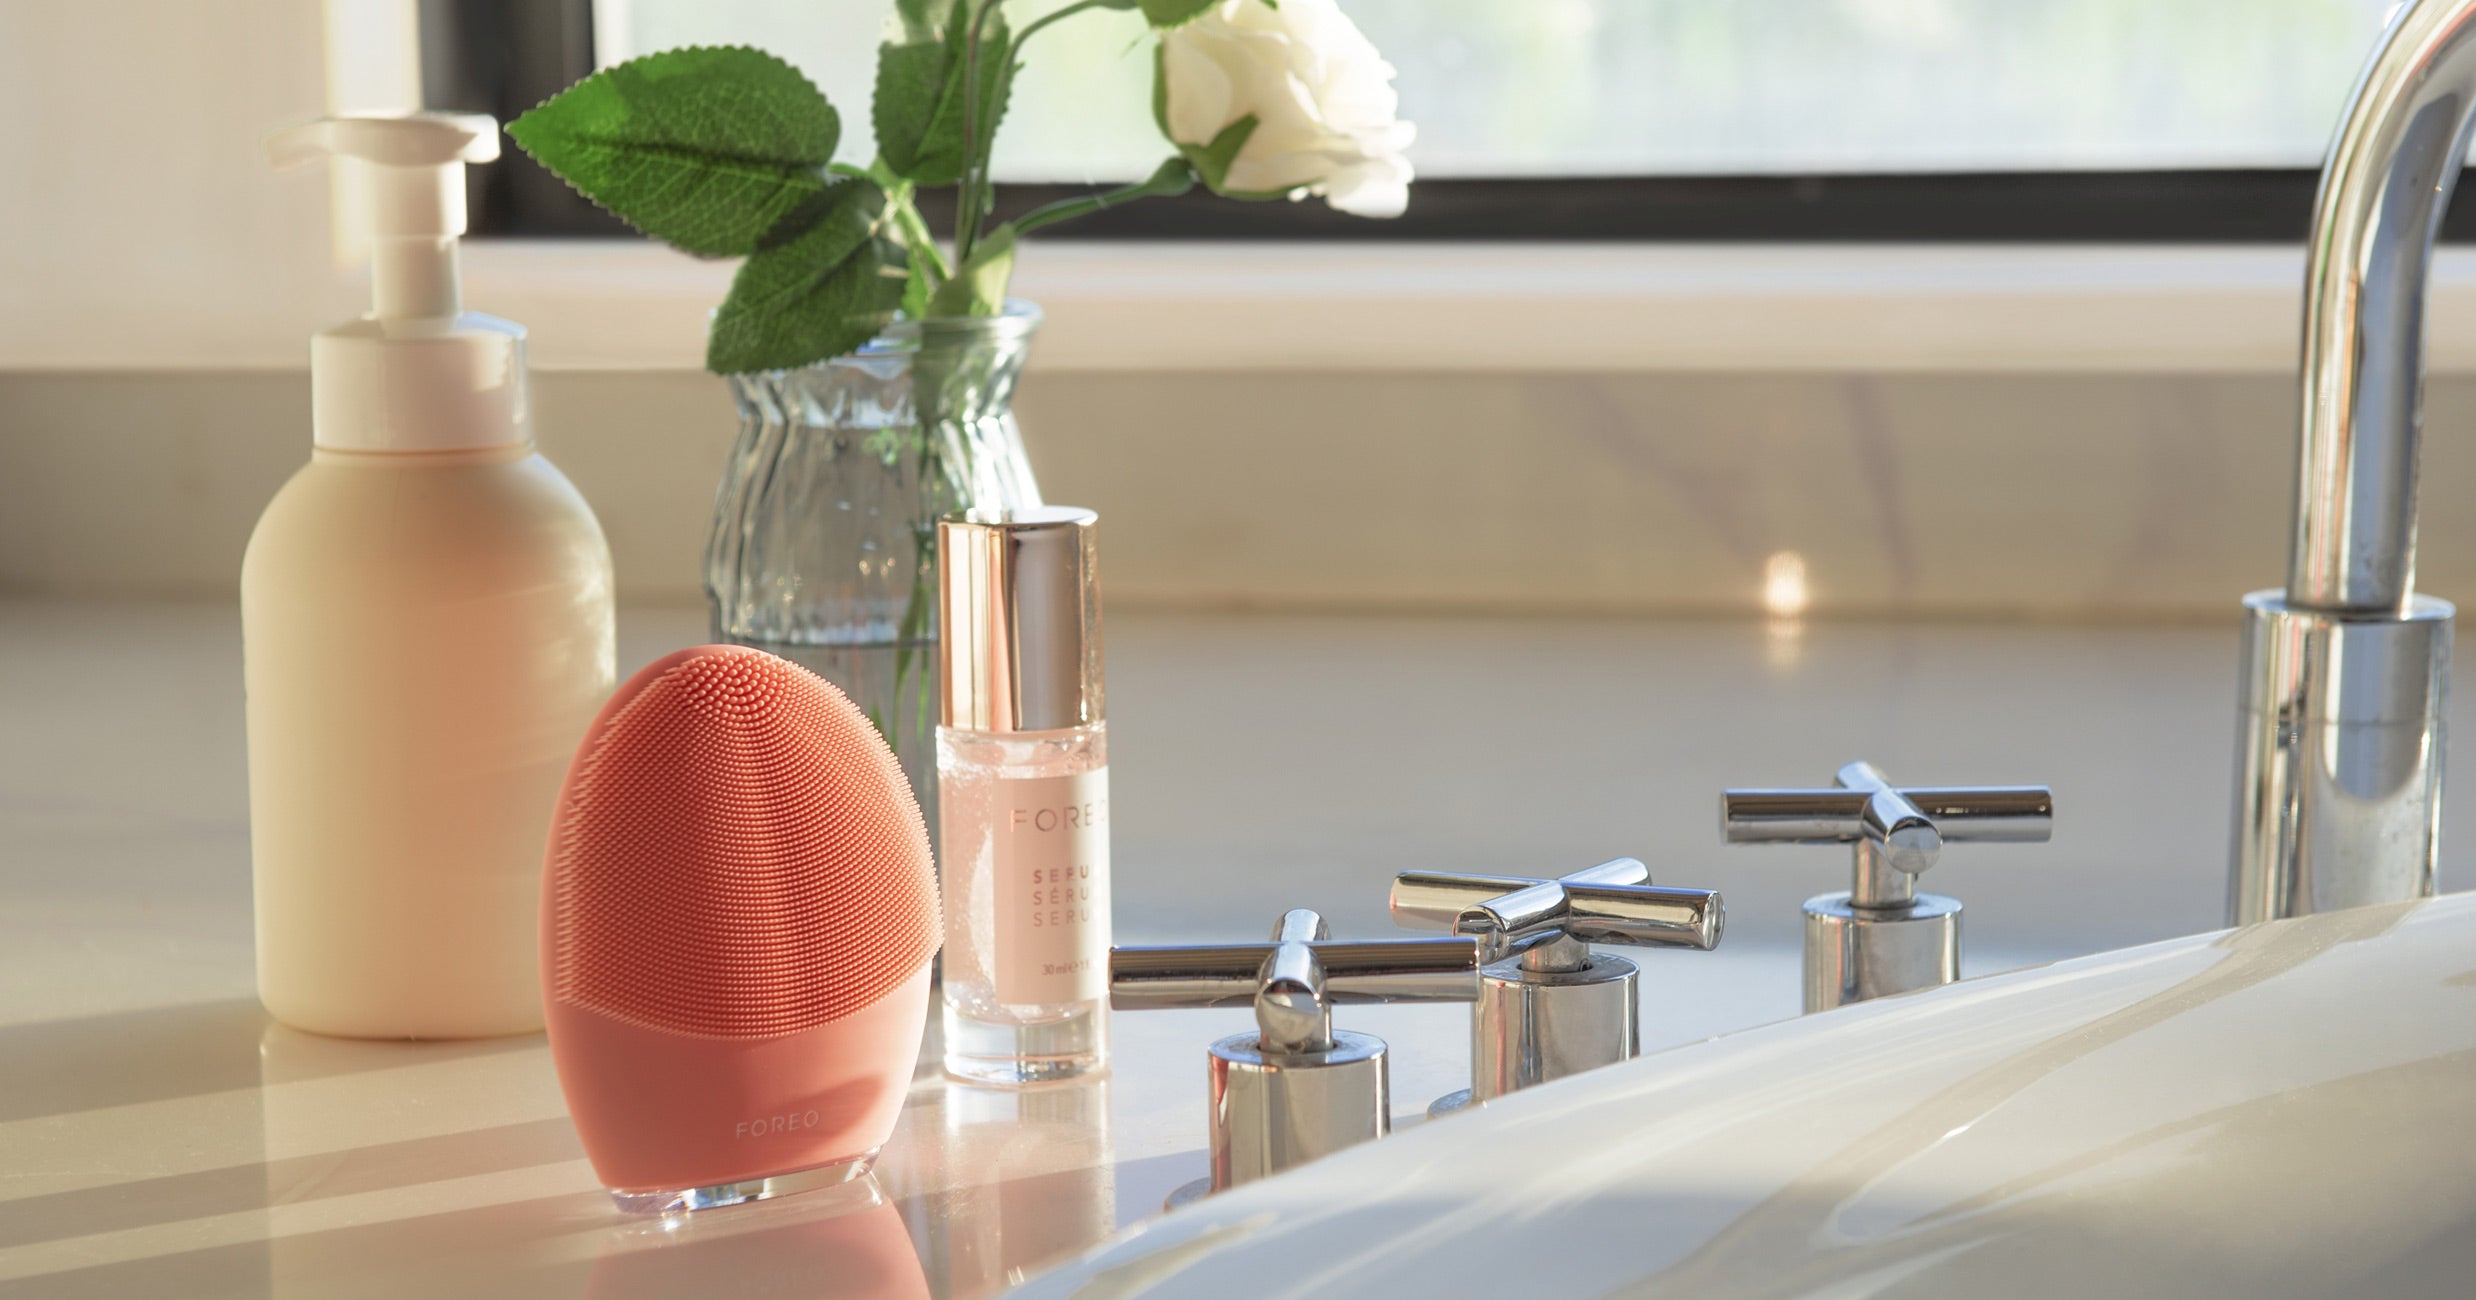 Foreo Just Launched Its Smartest Luna Yet – But Is It Worth It?